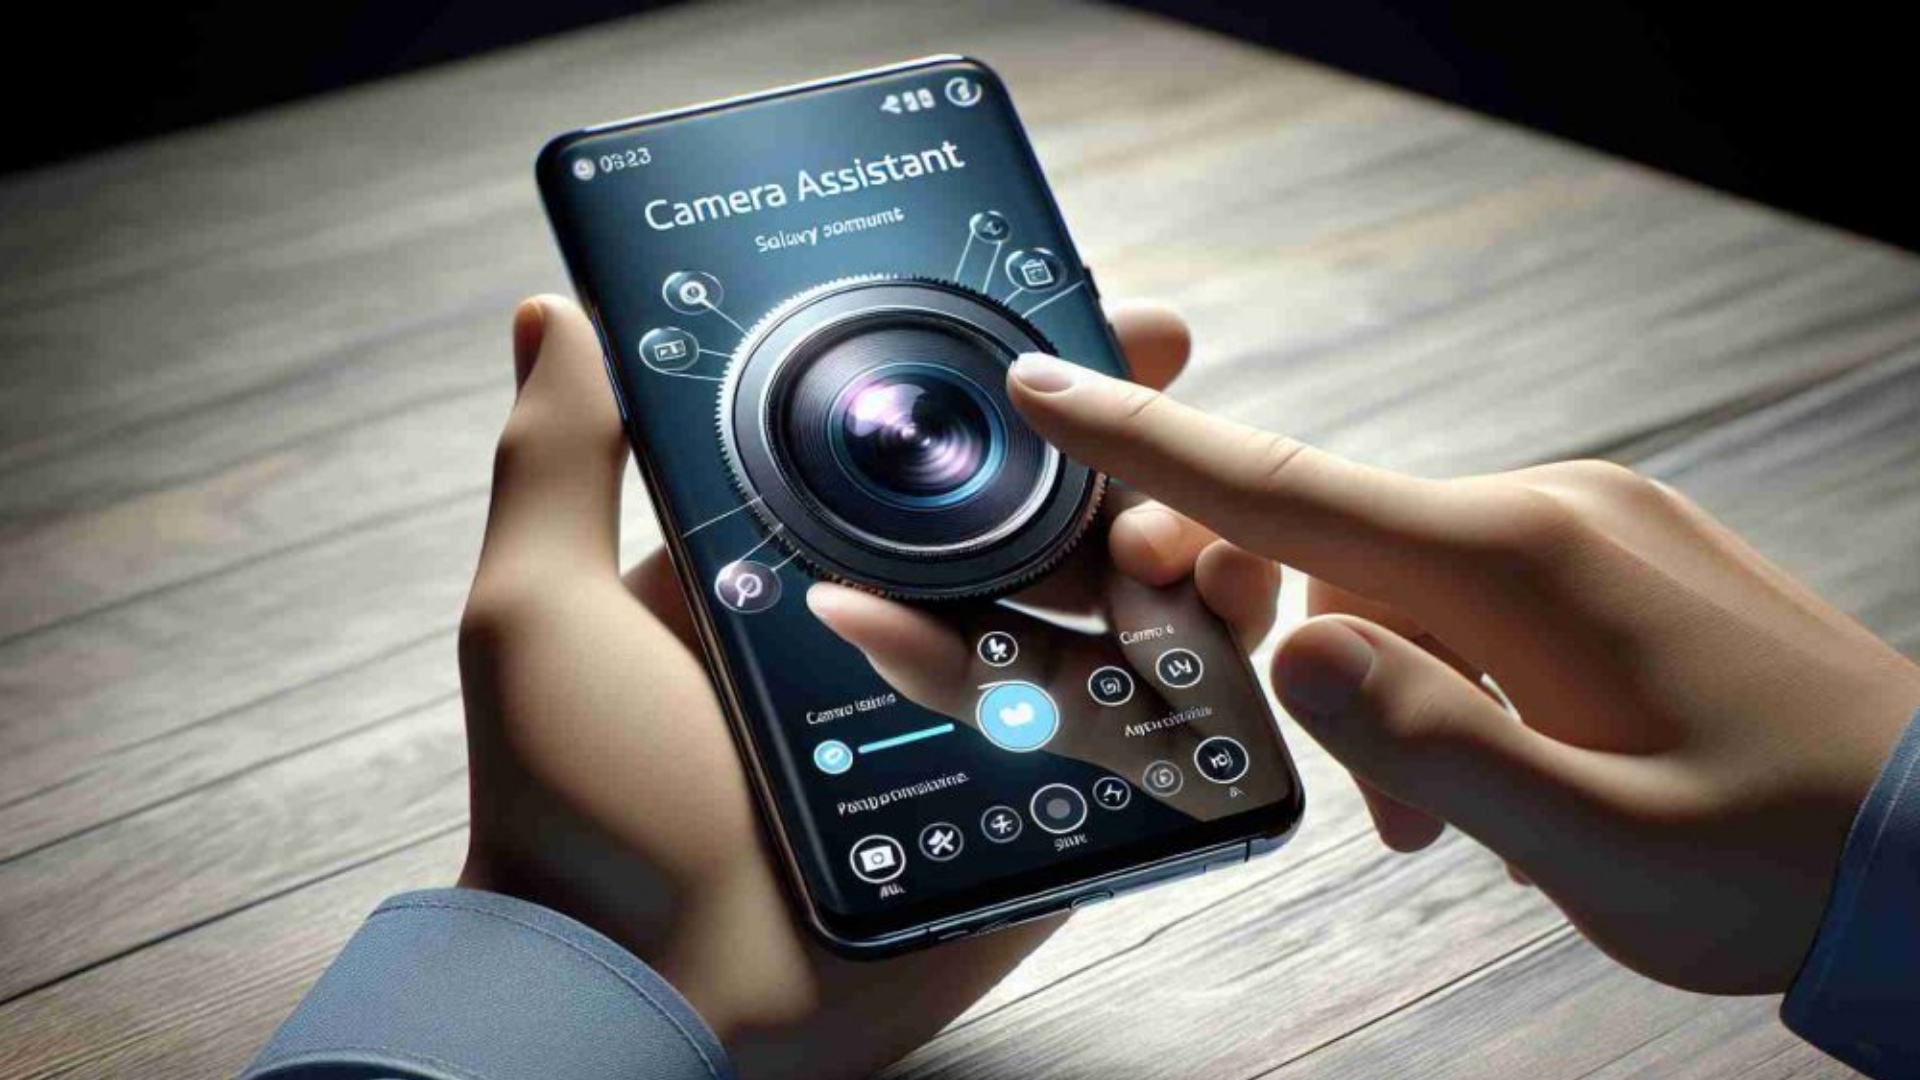 Samsung's Camera Assistant is now available for Galaxy A-series devices.